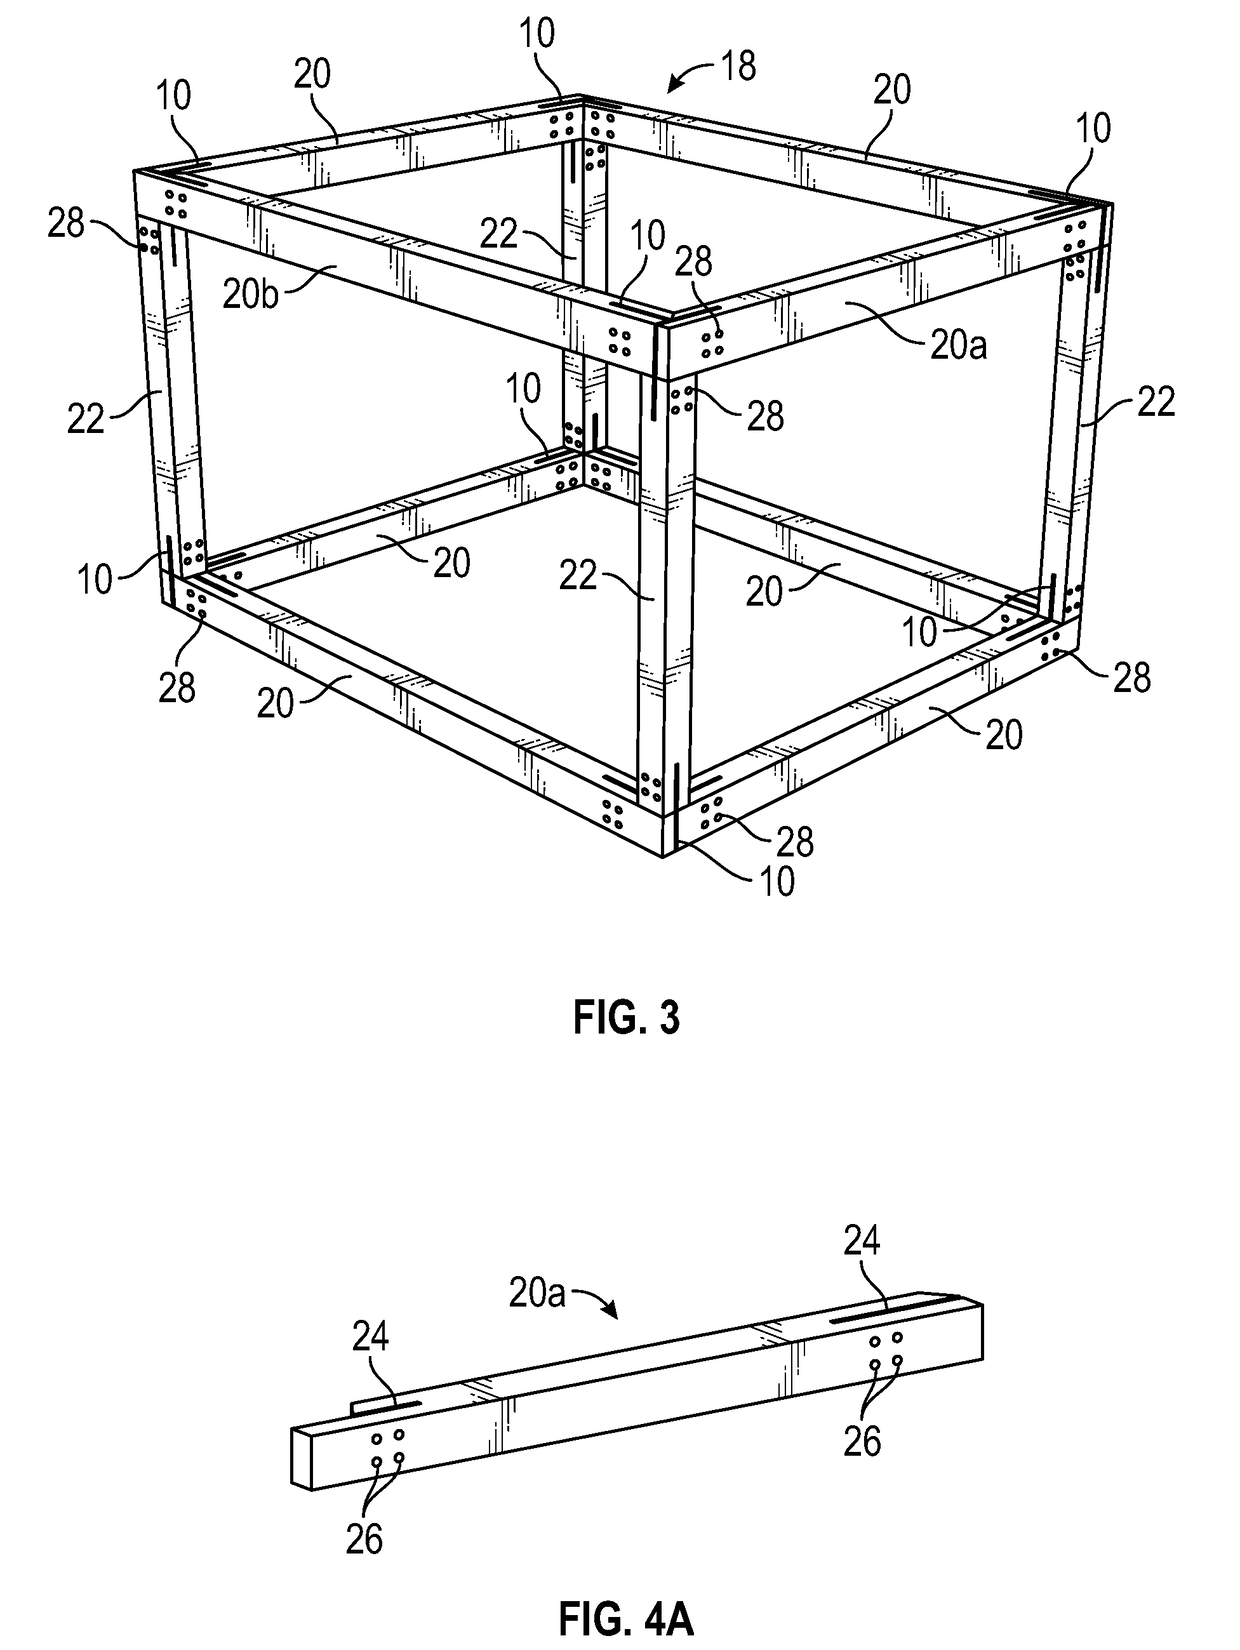 Modular construction system and method